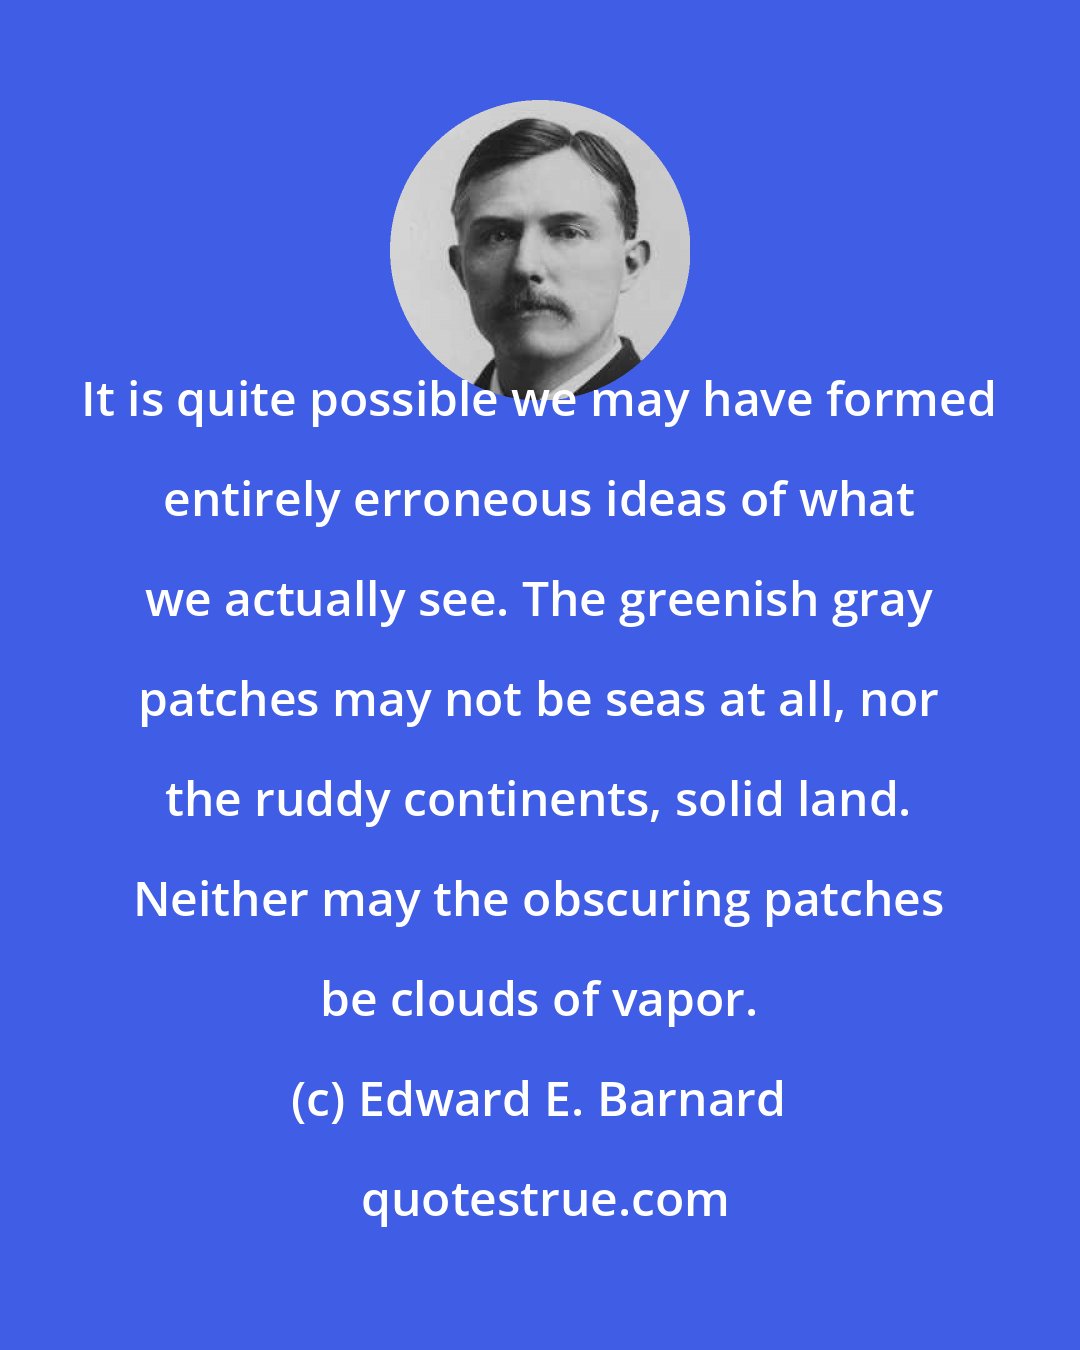 Edward E. Barnard: It is quite possible we may have formed entirely erroneous ideas of what we actually see. The greenish gray patches may not be seas at all, nor the ruddy continents, solid land. Neither may the obscuring patches be clouds of vapor.